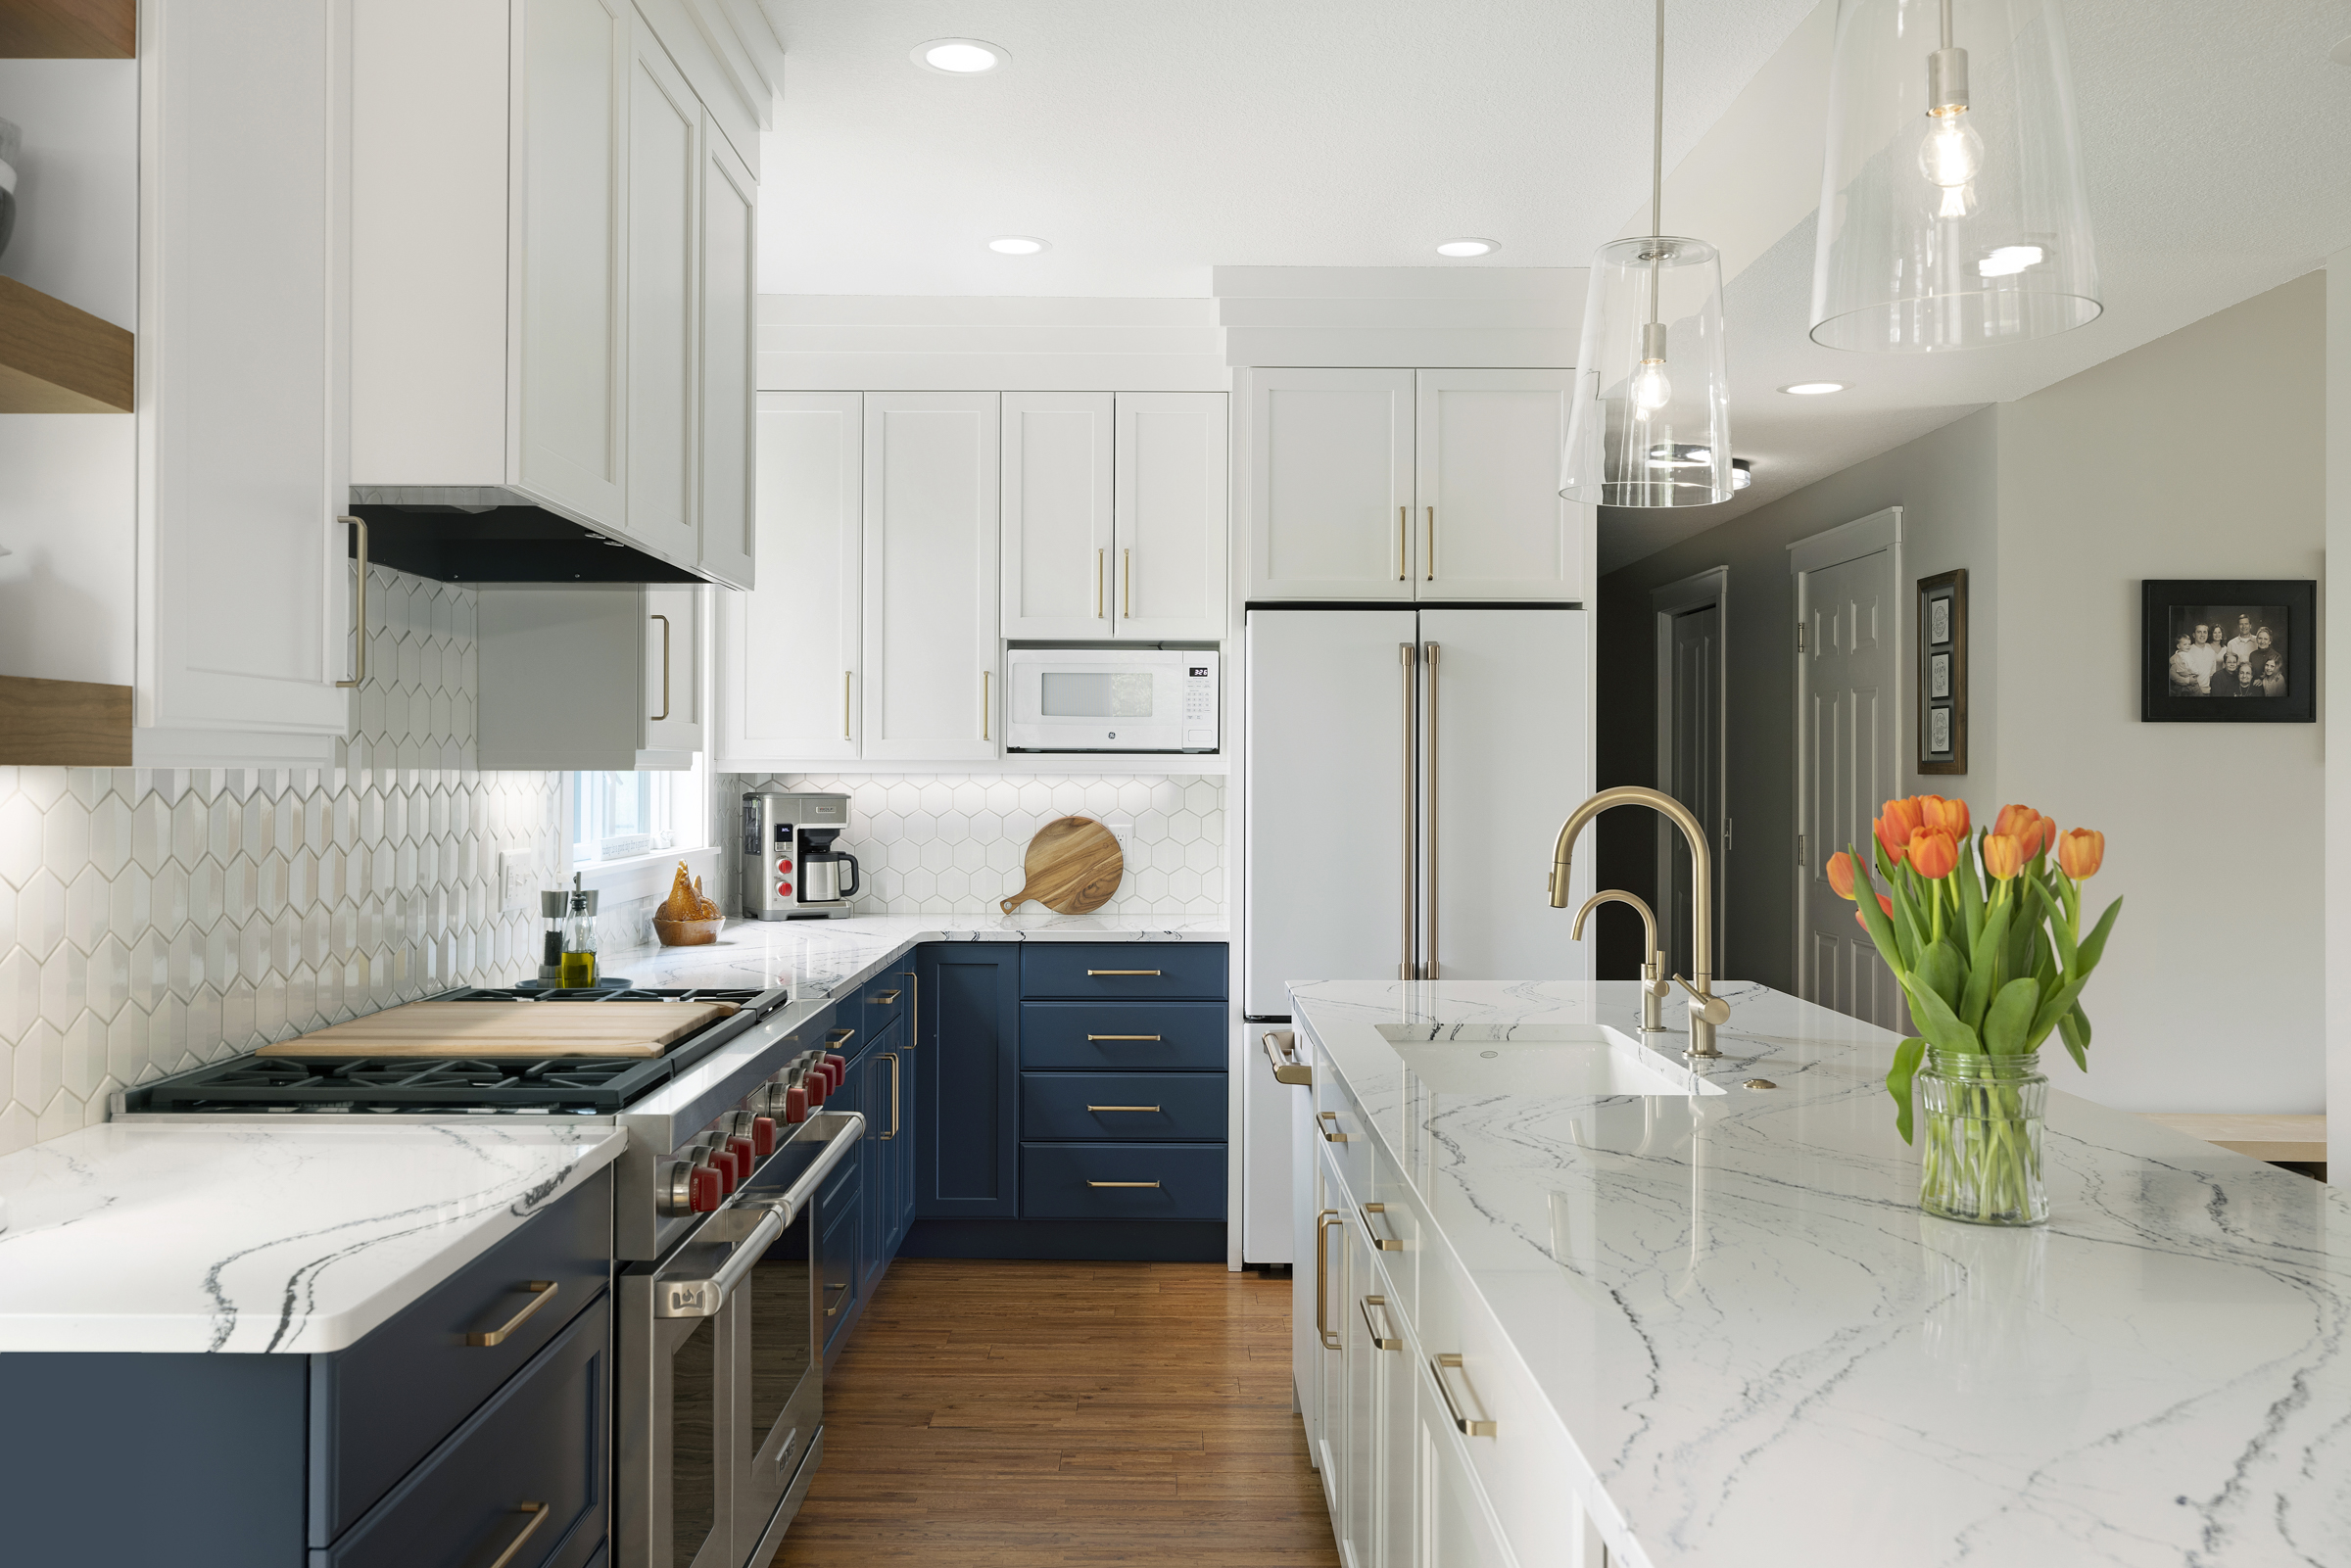 Kitchen remodel with large island with pendant lights, blue cabinets, and wood floors